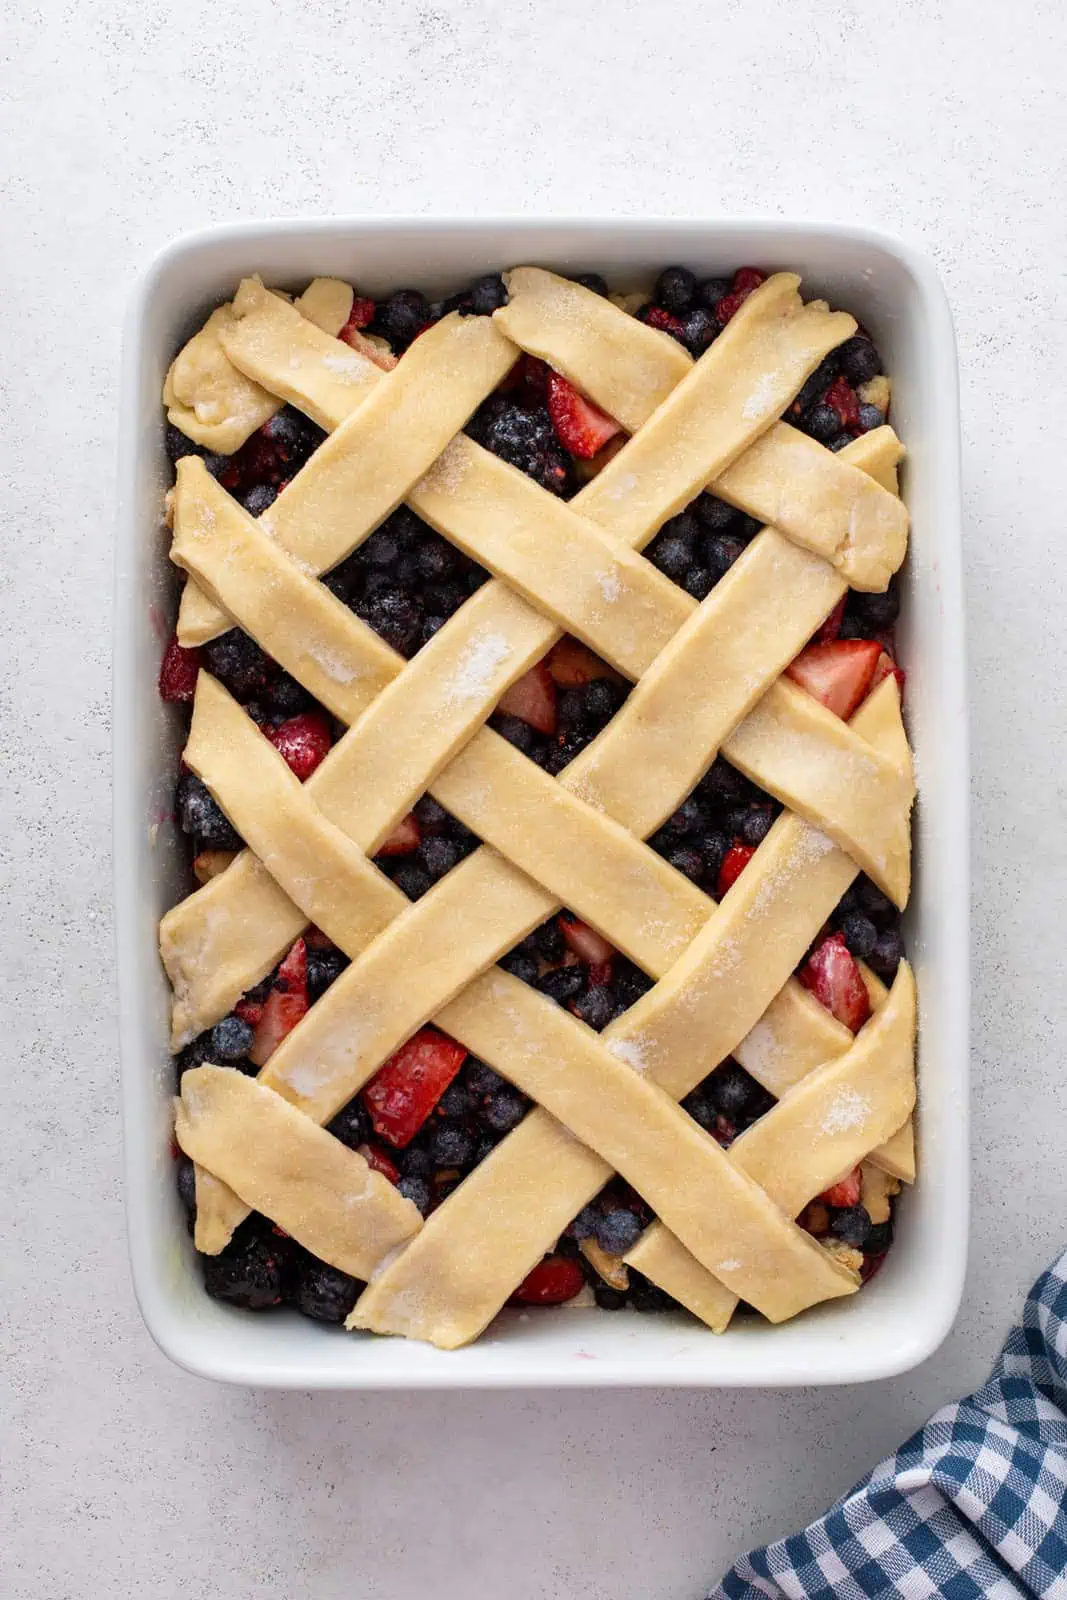 Assembled mixed berry cobbler topped with a lattice crust, ready to go in the oven.